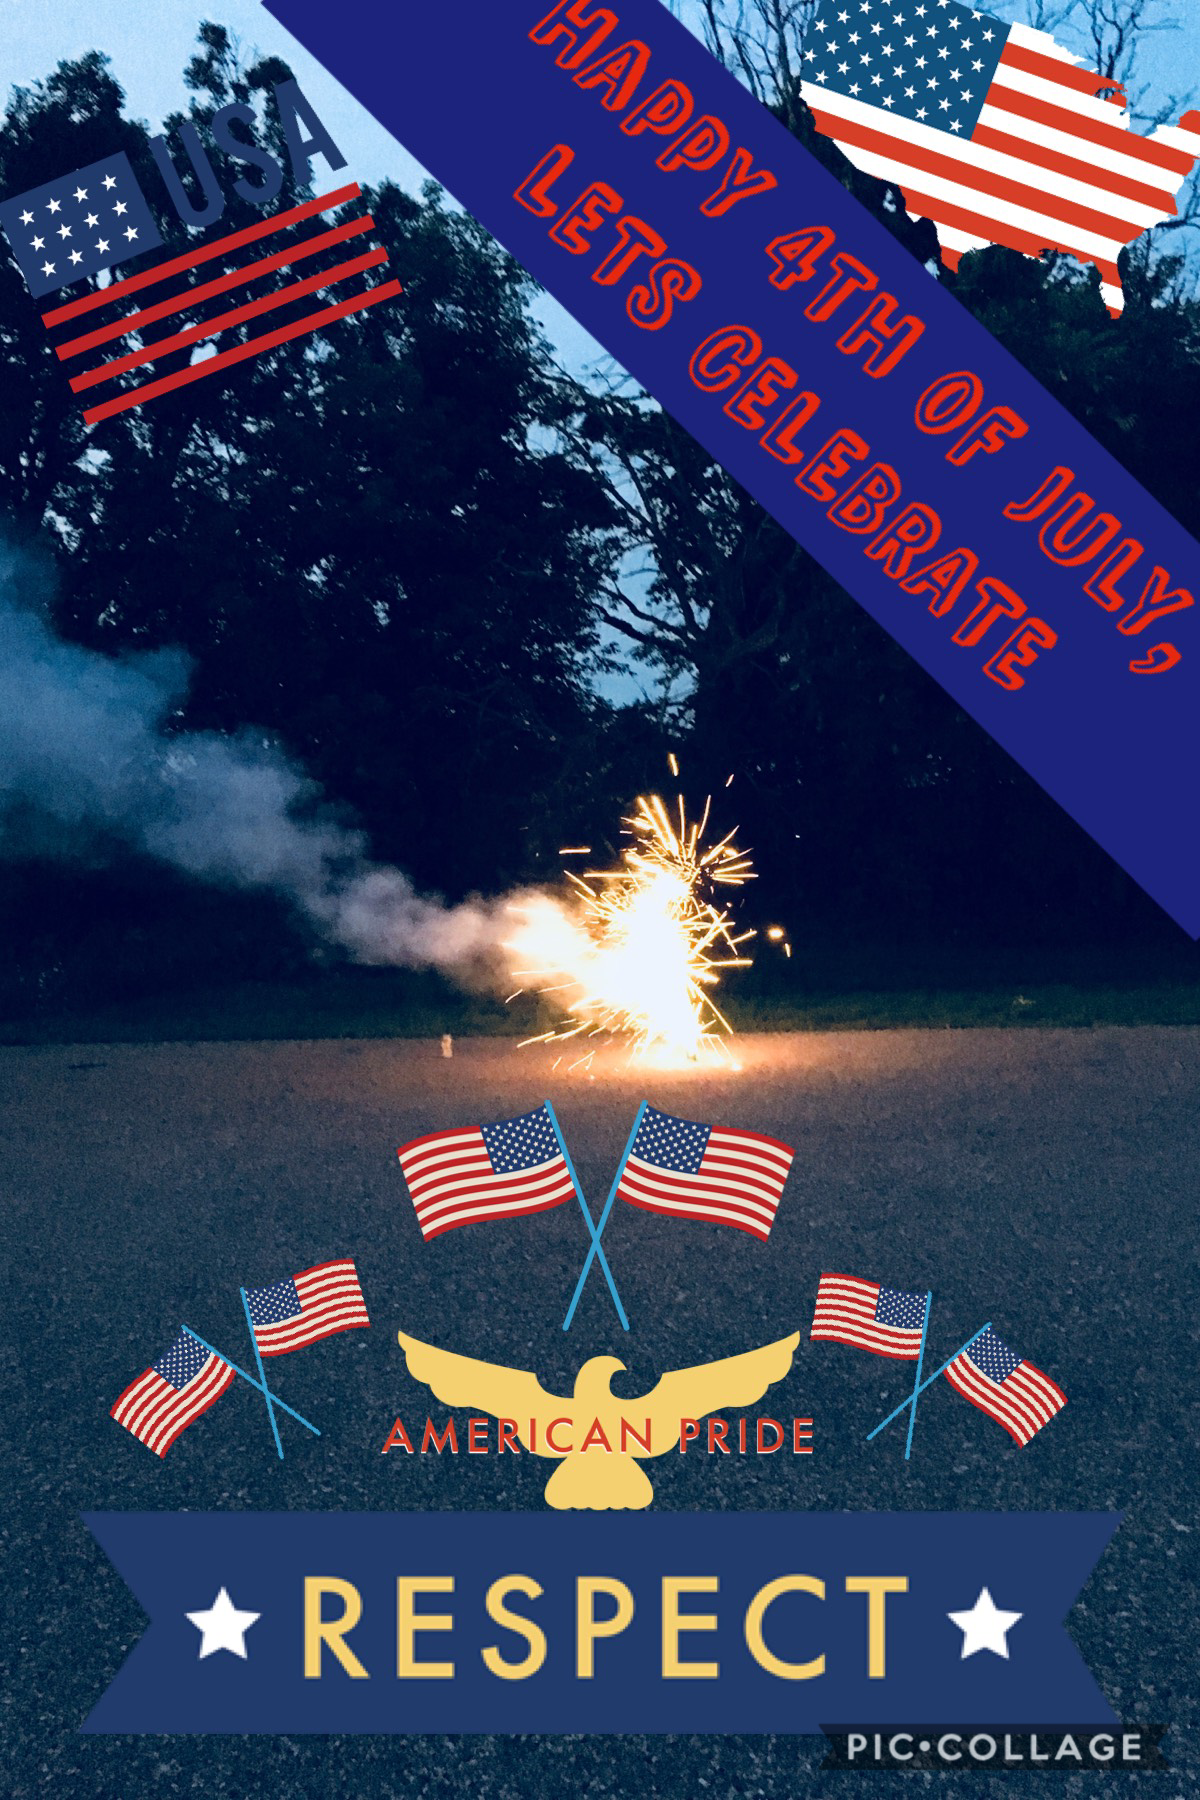 Get ready for the 4th!!!